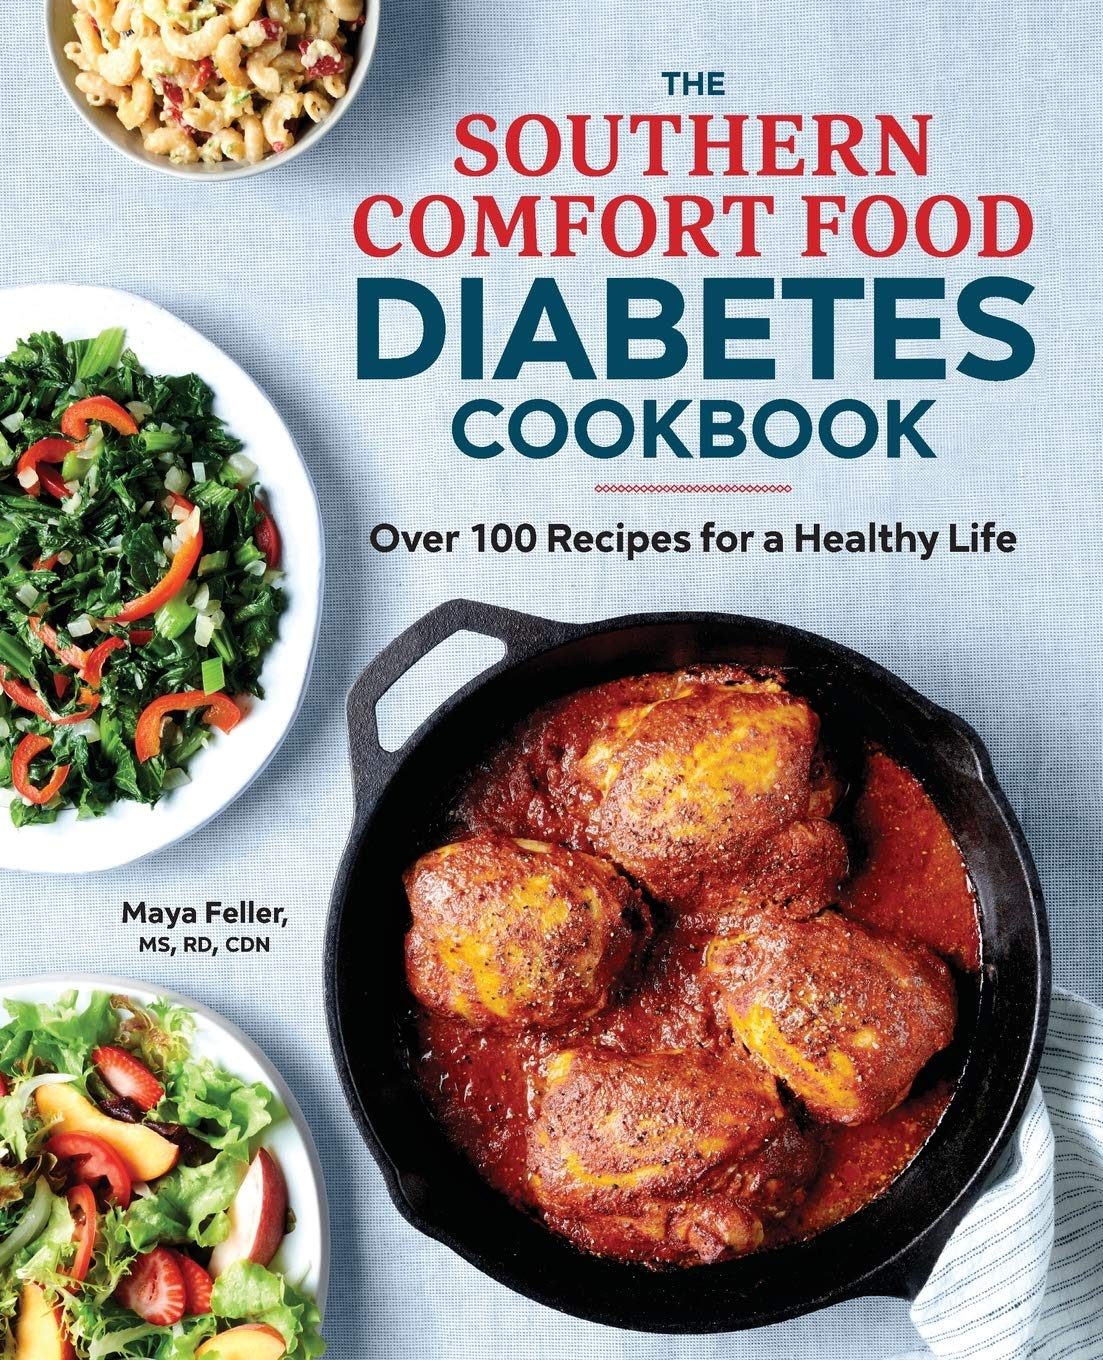 15 Bestselling Healthy Cookbooks on Amazon | The Healthy